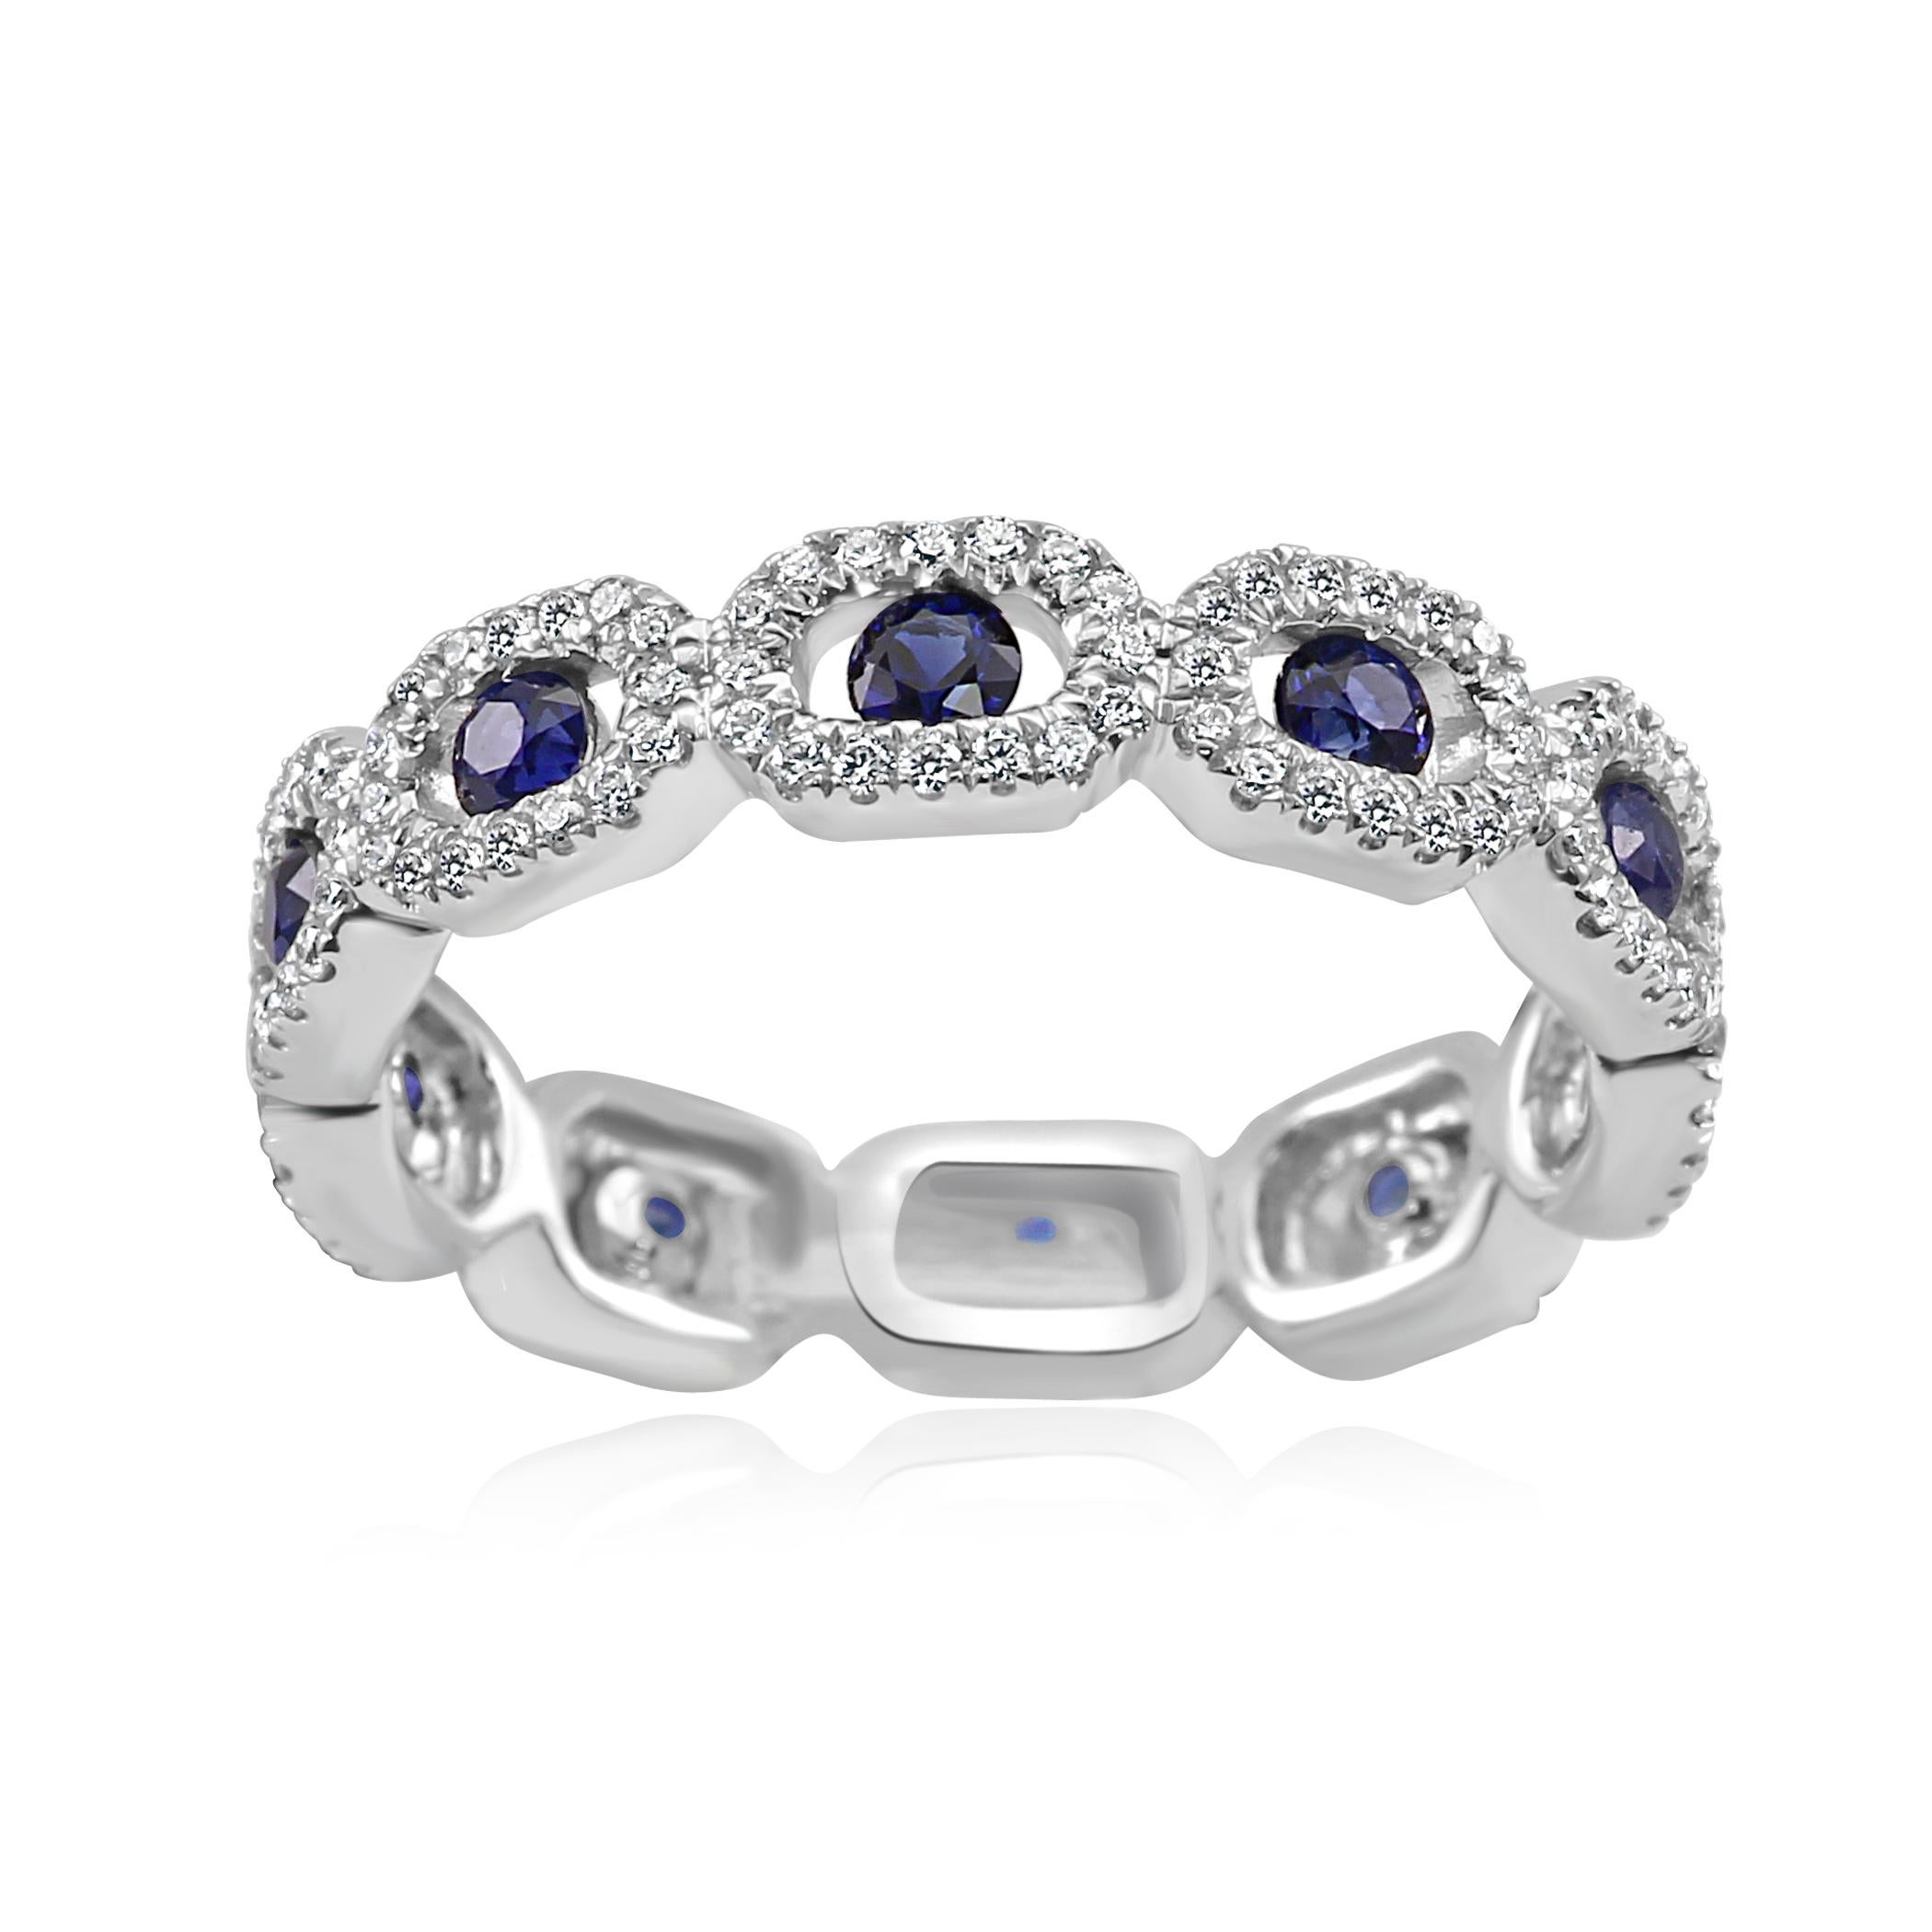 10 Blue Sapphire Round 0.65 Carat, set in single Halo of 160 White Colorless G-H Color SI clarity Diamond Rounds 0.45 Carta set in 14K White Gold Eternity Fashion Cocktail Band Ring.

Total Stone Weight 1.00 Carat

Style available in different price